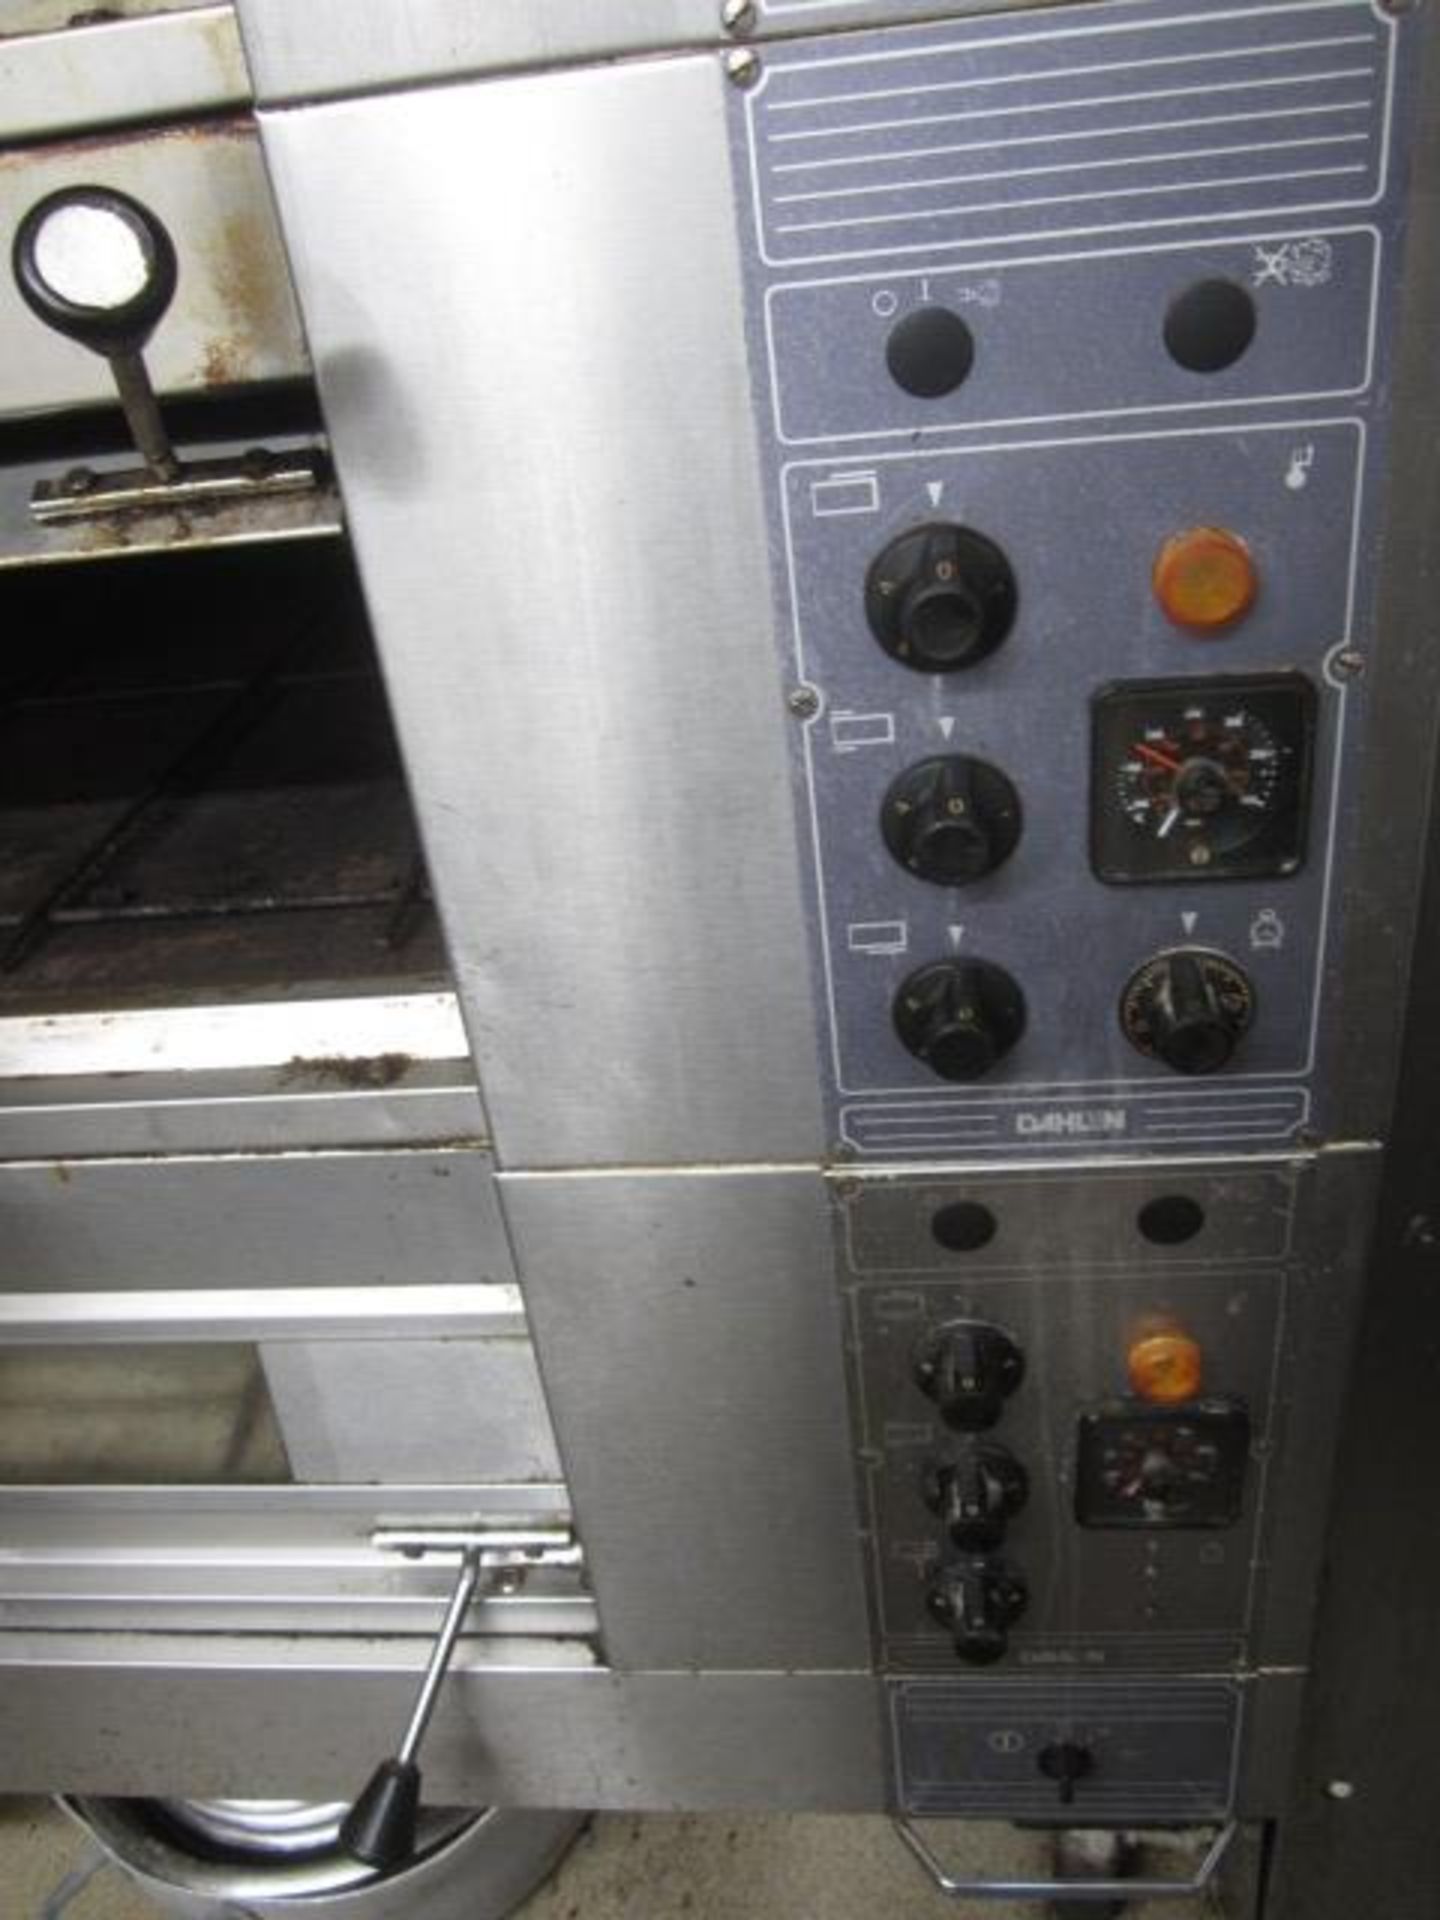 Dahlen stainless steel commercial 4 deck oven, 56" deck width, approx. overall size: 1950mm x 2010mm - Image 7 of 7